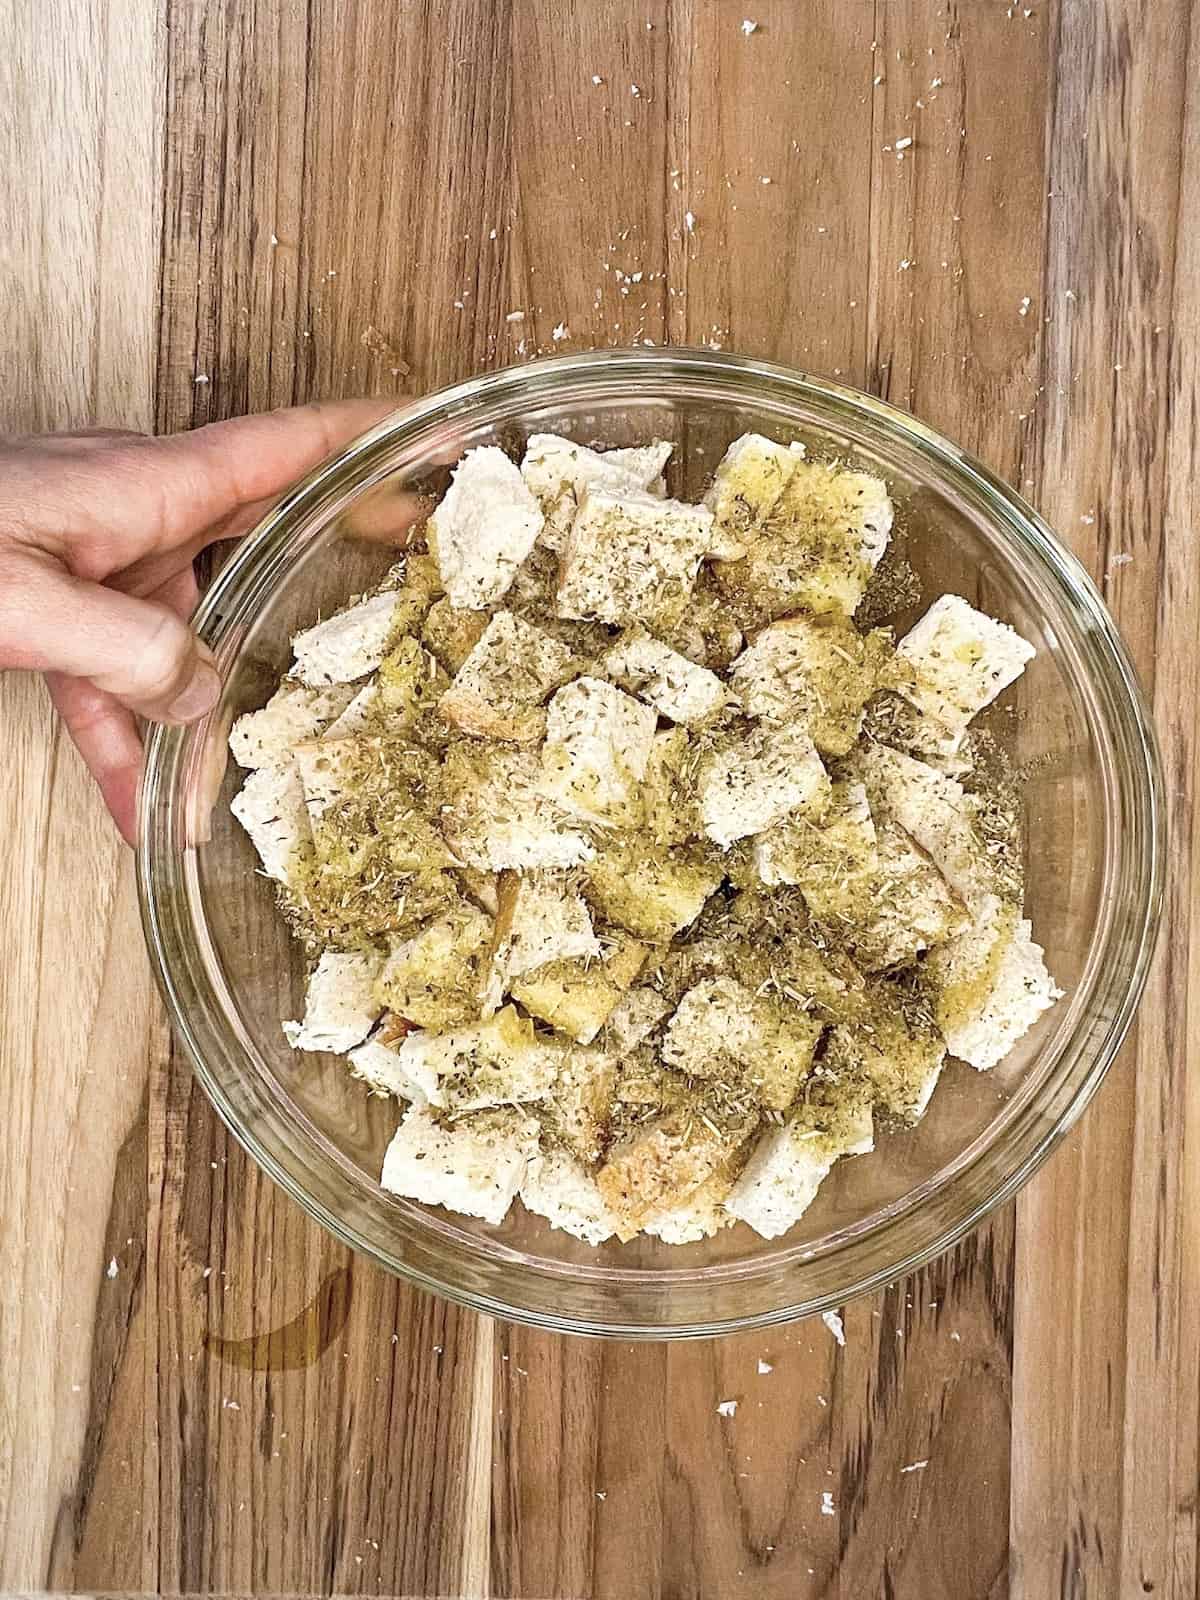 a large bowl of bread cubes with spice blend and oil on top